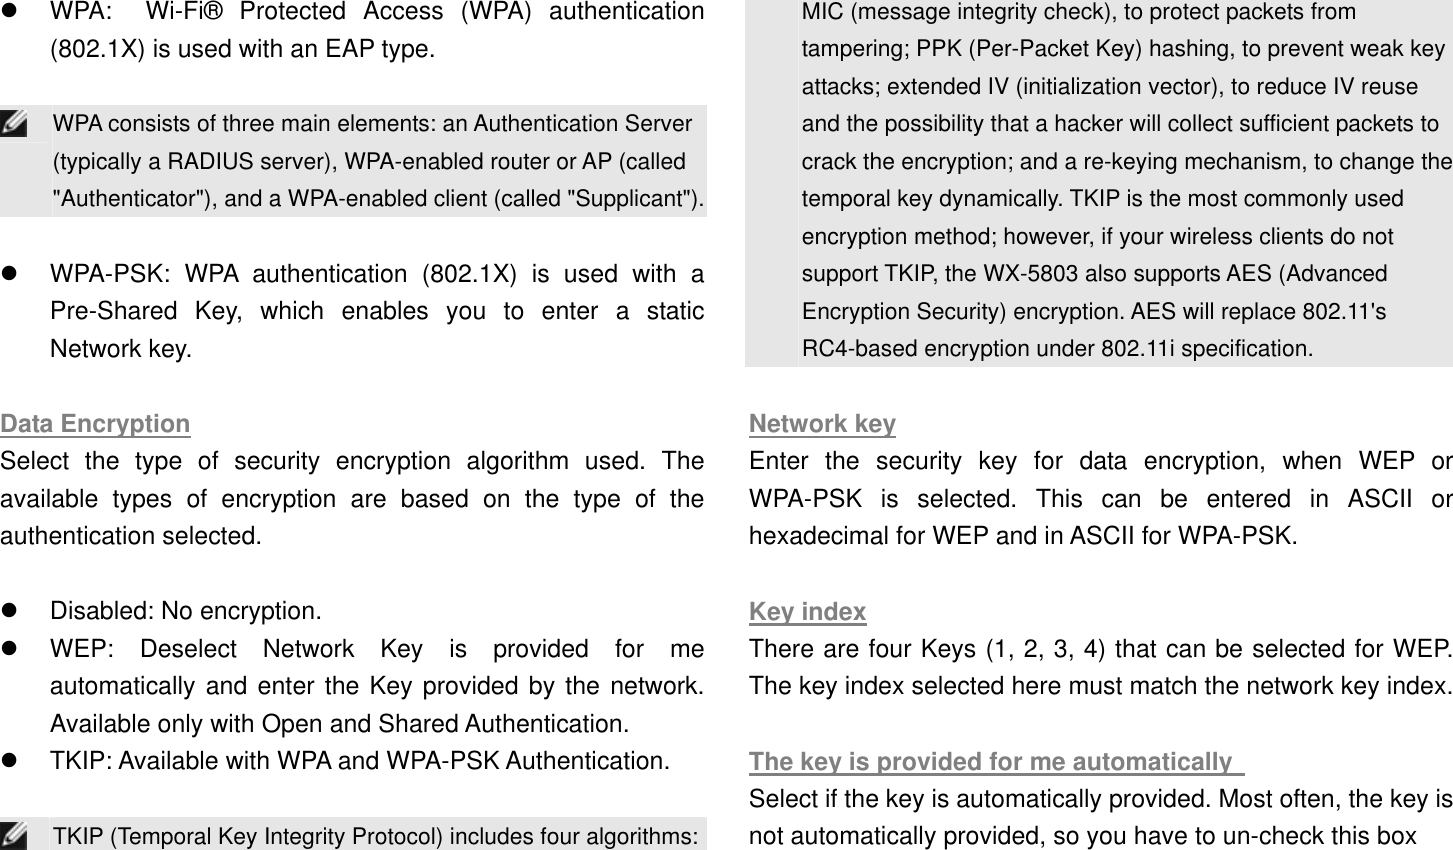   WPA:  Wi-Fi® Protected Access (WPA) authentication (802.1X) is used with an EAP type.     WPA consists of three main elements: an Authentication Server (typically a RADIUS server), WPA-enabled router or AP (called &quot;Authenticator&quot;), and a WPA-enabled client (called &quot;Supplicant&quot;).   WPA-PSK: WPA authentication (802.1X) is used with a Pre-Shared Key, which enables you to enter a static Network key.    Data Encryption Select the type of security encryption algorithm used. The available types of encryption are based on the type of the authentication selected.      Disabled: No encryption.     WEP: Deselect Network Key is provided for me automatically and enter the Key provided by the network. Available only with Open and Shared Authentication.     TKIP: Available with WPA and WPA-PSK Authentication.     TKIP (Temporal Key Integrity Protocol) includes four algorithms:MIC (message integrity check), to protect packets from tampering; PPK (Per-Packet Key) hashing, to prevent weak key attacks; extended IV (initialization vector), to reduce IV reuse and the possibility that a hacker will collect sufficient packets to crack the encryption; and a re-keying mechanism, to change the temporal key dynamically. TKIP is the most commonly used encryption method; however, if your wireless clients do not support TKIP, the WX-5803 also supports AES (Advanced Encryption Security) encryption. AES will replace 802.11&apos;s RC4-based encryption under 802.11i specification.  Network key Enter the security key for data encryption, when WEP or WPA-PSK is selected. This can be entered in ASCII or hexadecimal for WEP and in ASCII for WPA-PSK.      Key index There are four Keys (1, 2, 3, 4) that can be selected for WEP. The key index selected here must match the network key index.  The key is provided for me automatically   Select if the key is automatically provided. Most often, the key is not automatically provided, so you have to un-check this box   